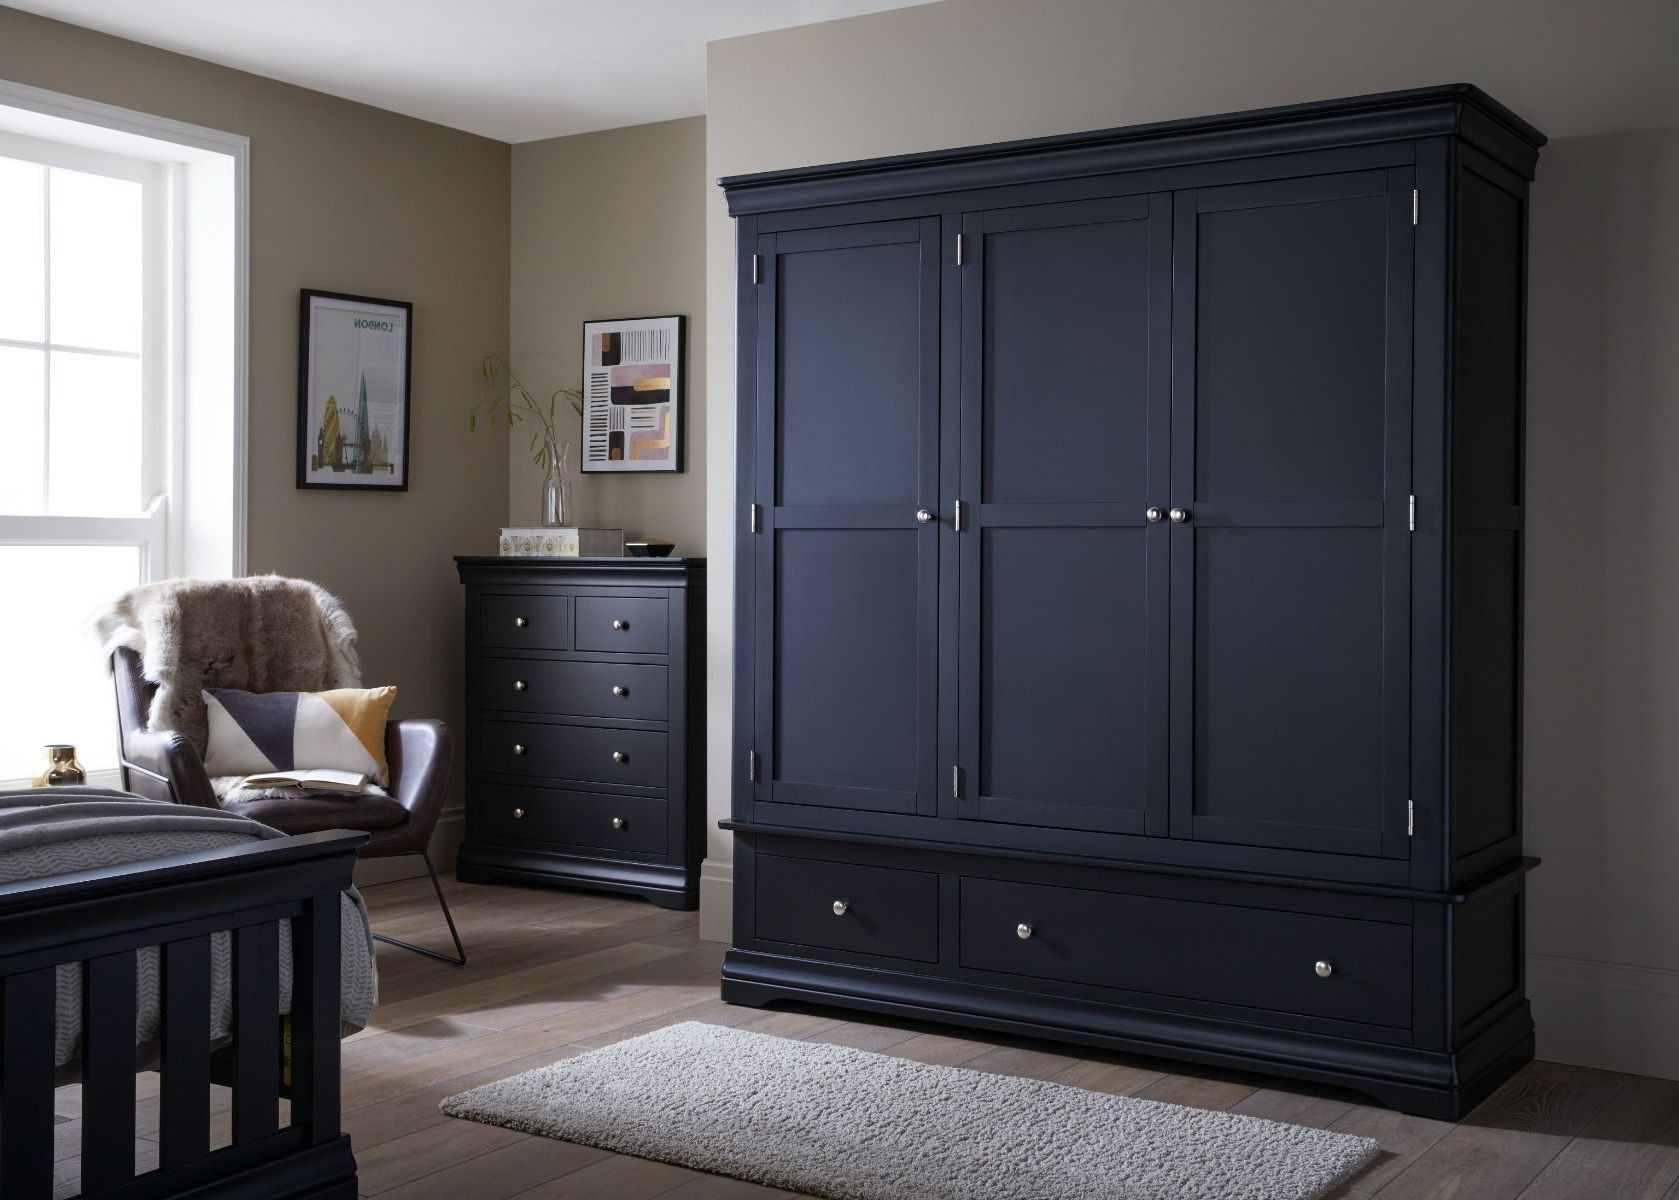 Toulouse Black Painted Large Triple Wardrobe With Drawer In Black Wardrobes (View 11 of 20)